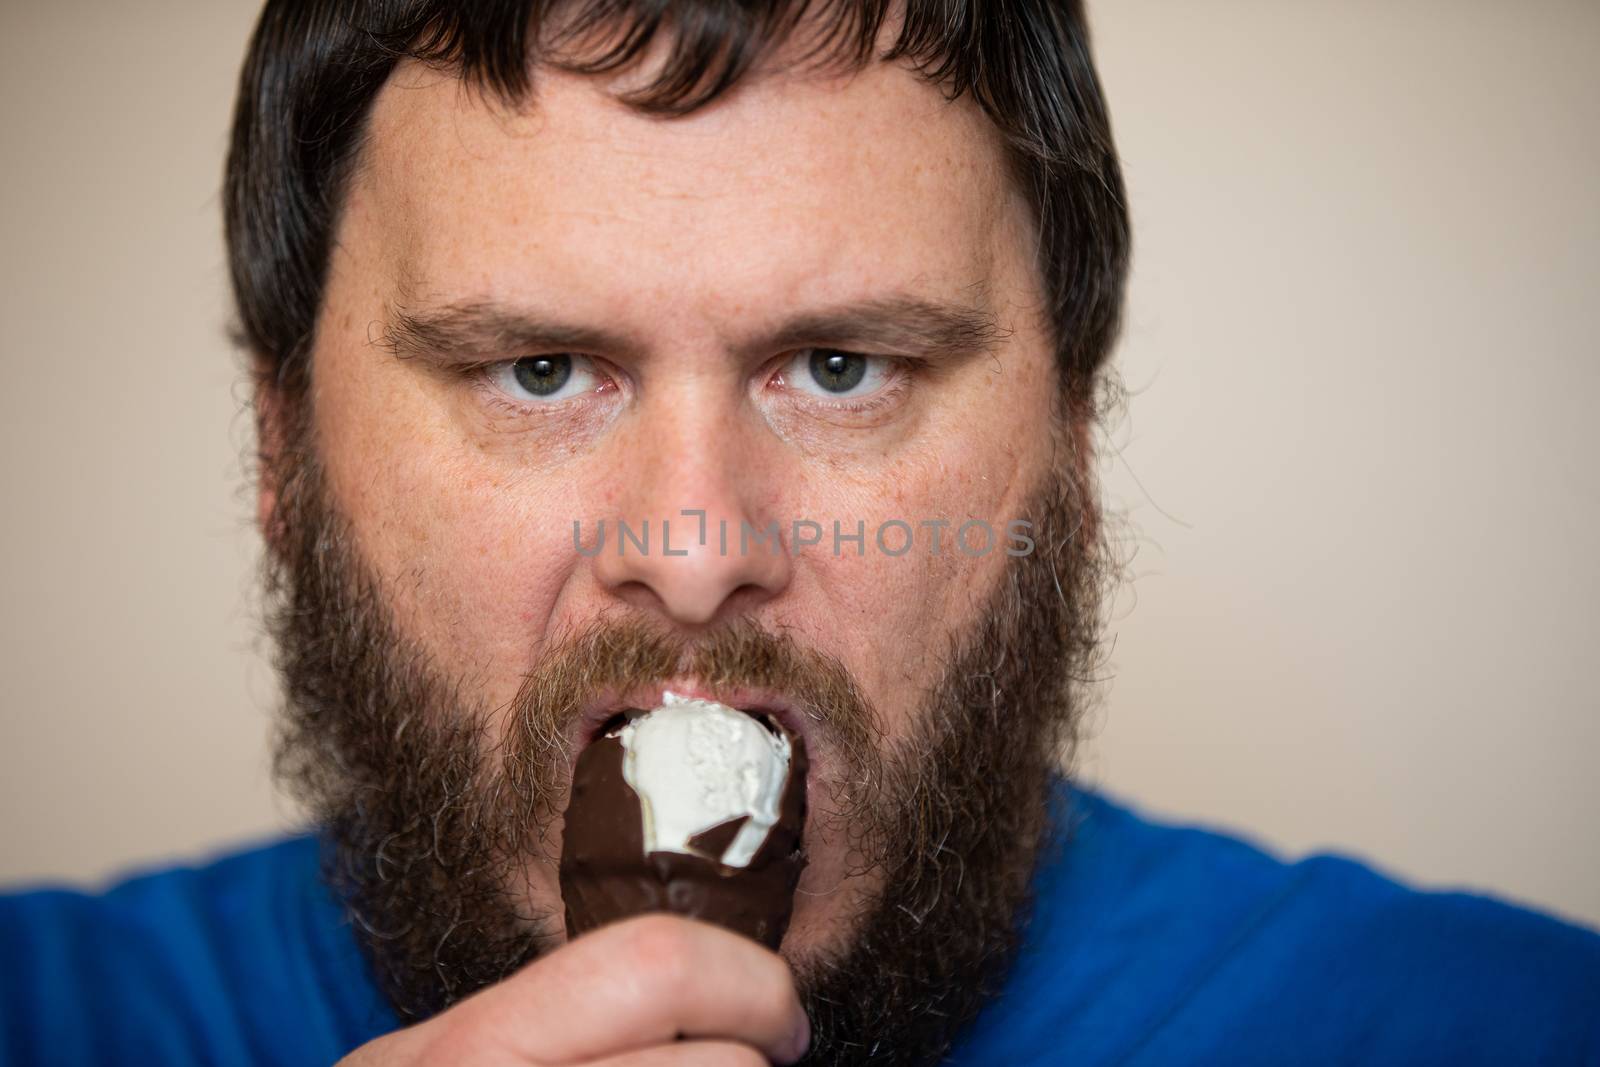 Bearded man eating ice cream with a firm look on his face